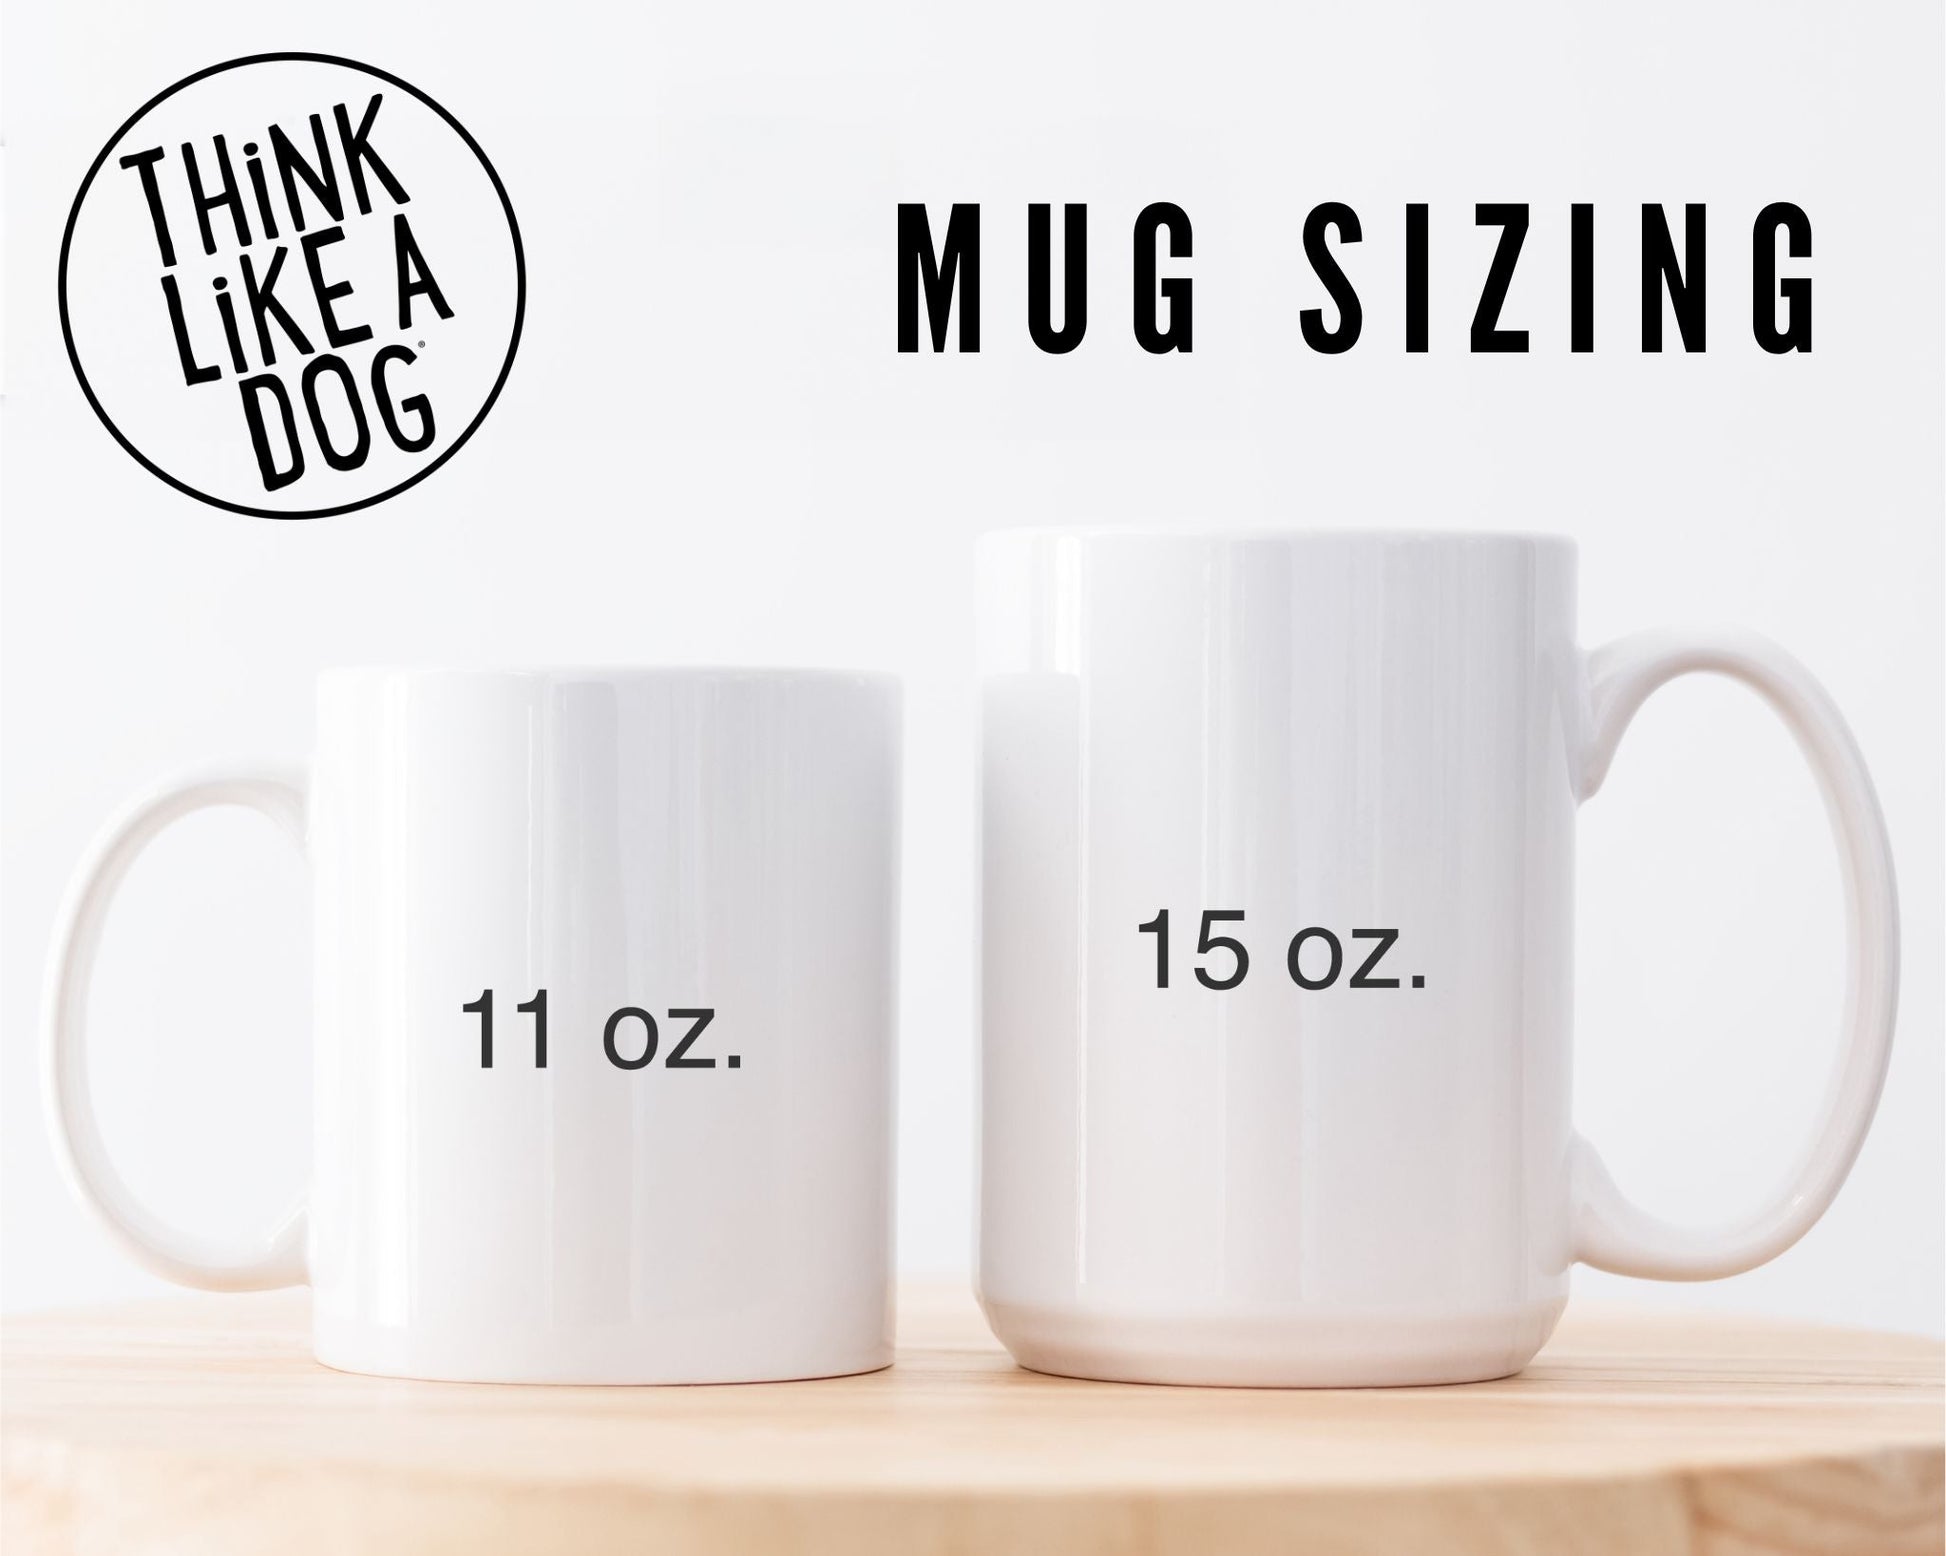 Two THiNK LiKE A DOG® White Glossy Mugs of different sizes, dedicated to dog lovers with their capacities labeled, 11 oz and 15 oz, depicted against a neutral background. Each features whimsical advice to "Think